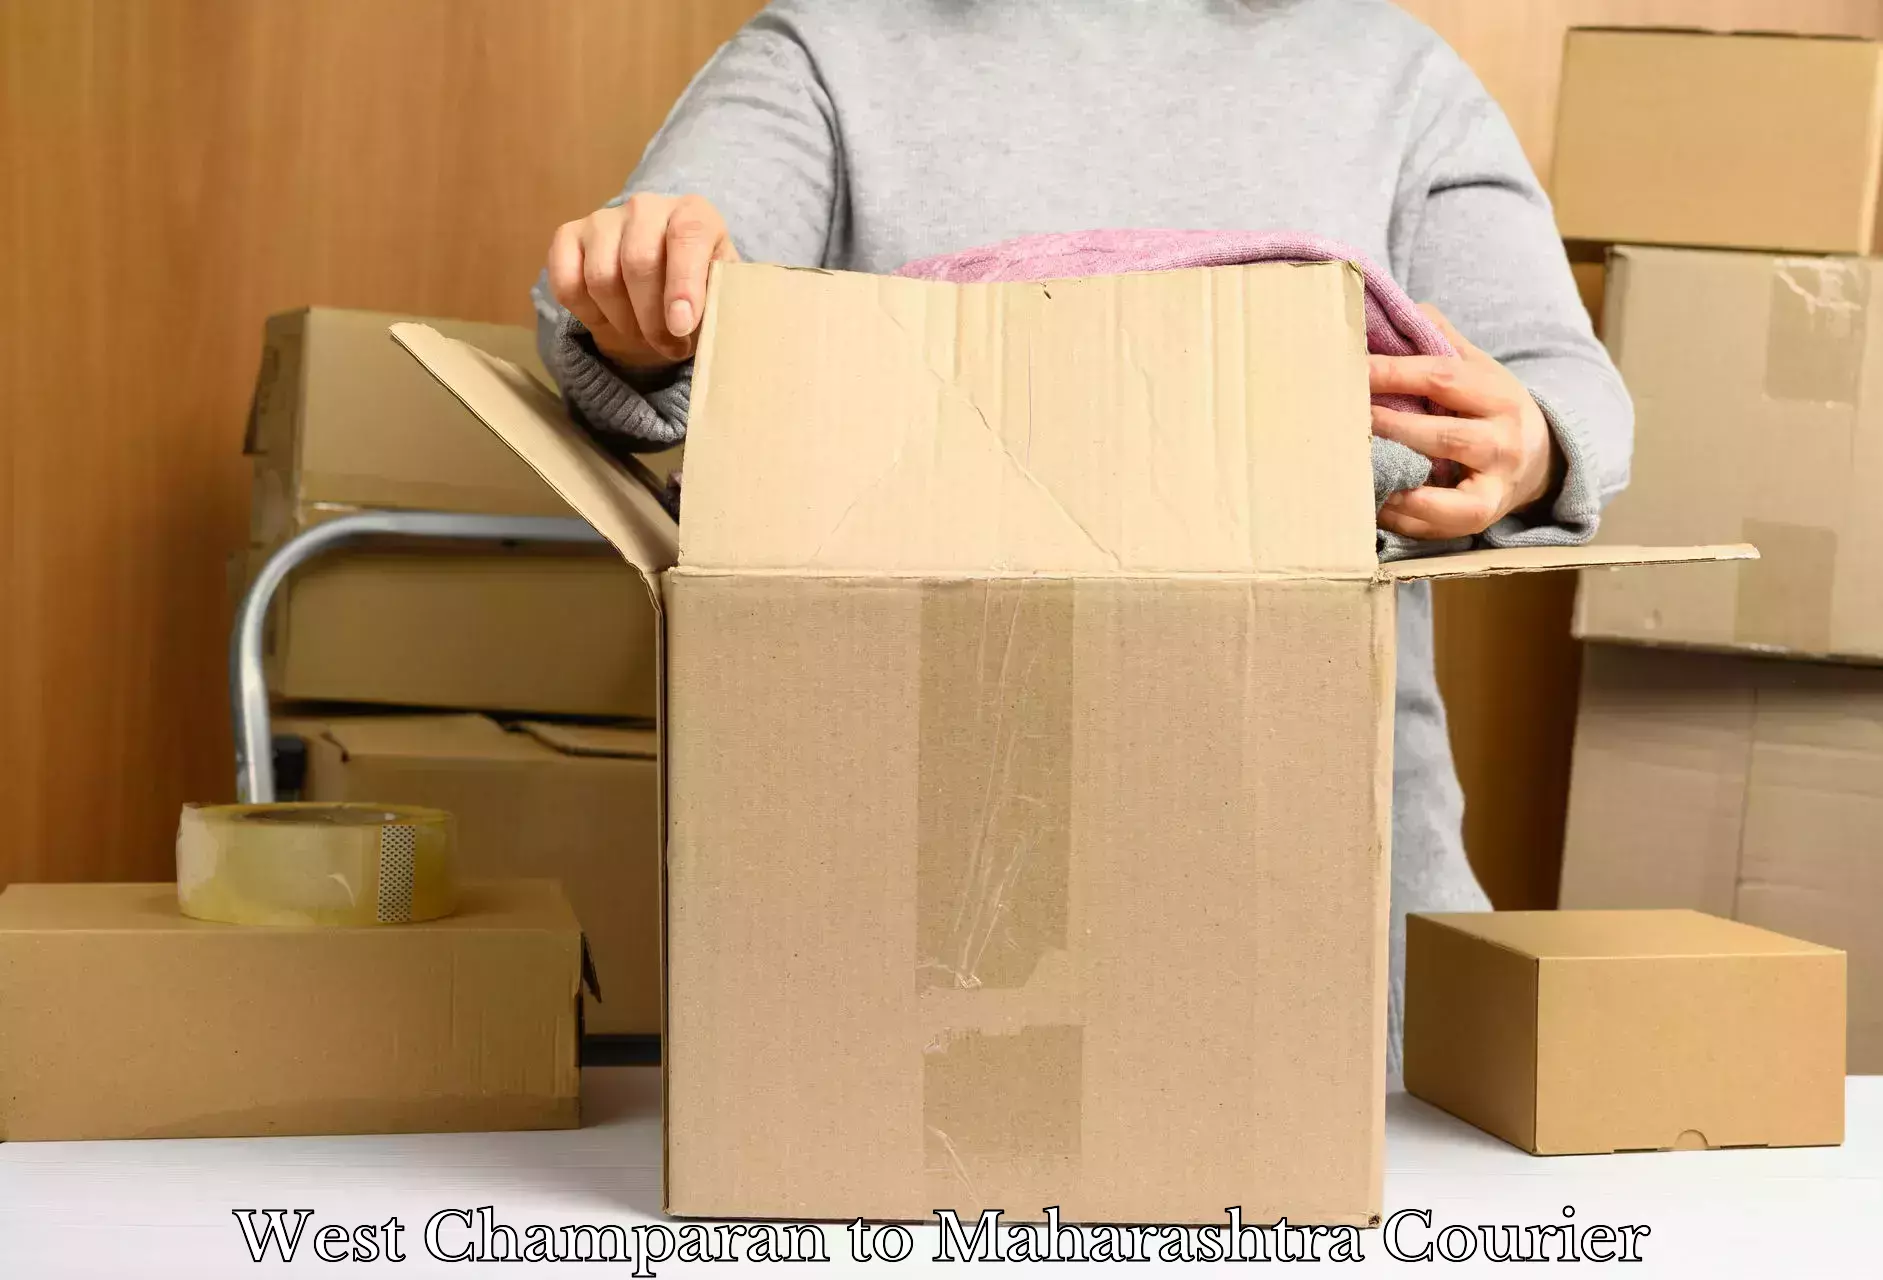 Furniture delivery service West Champaran to Maharashtra